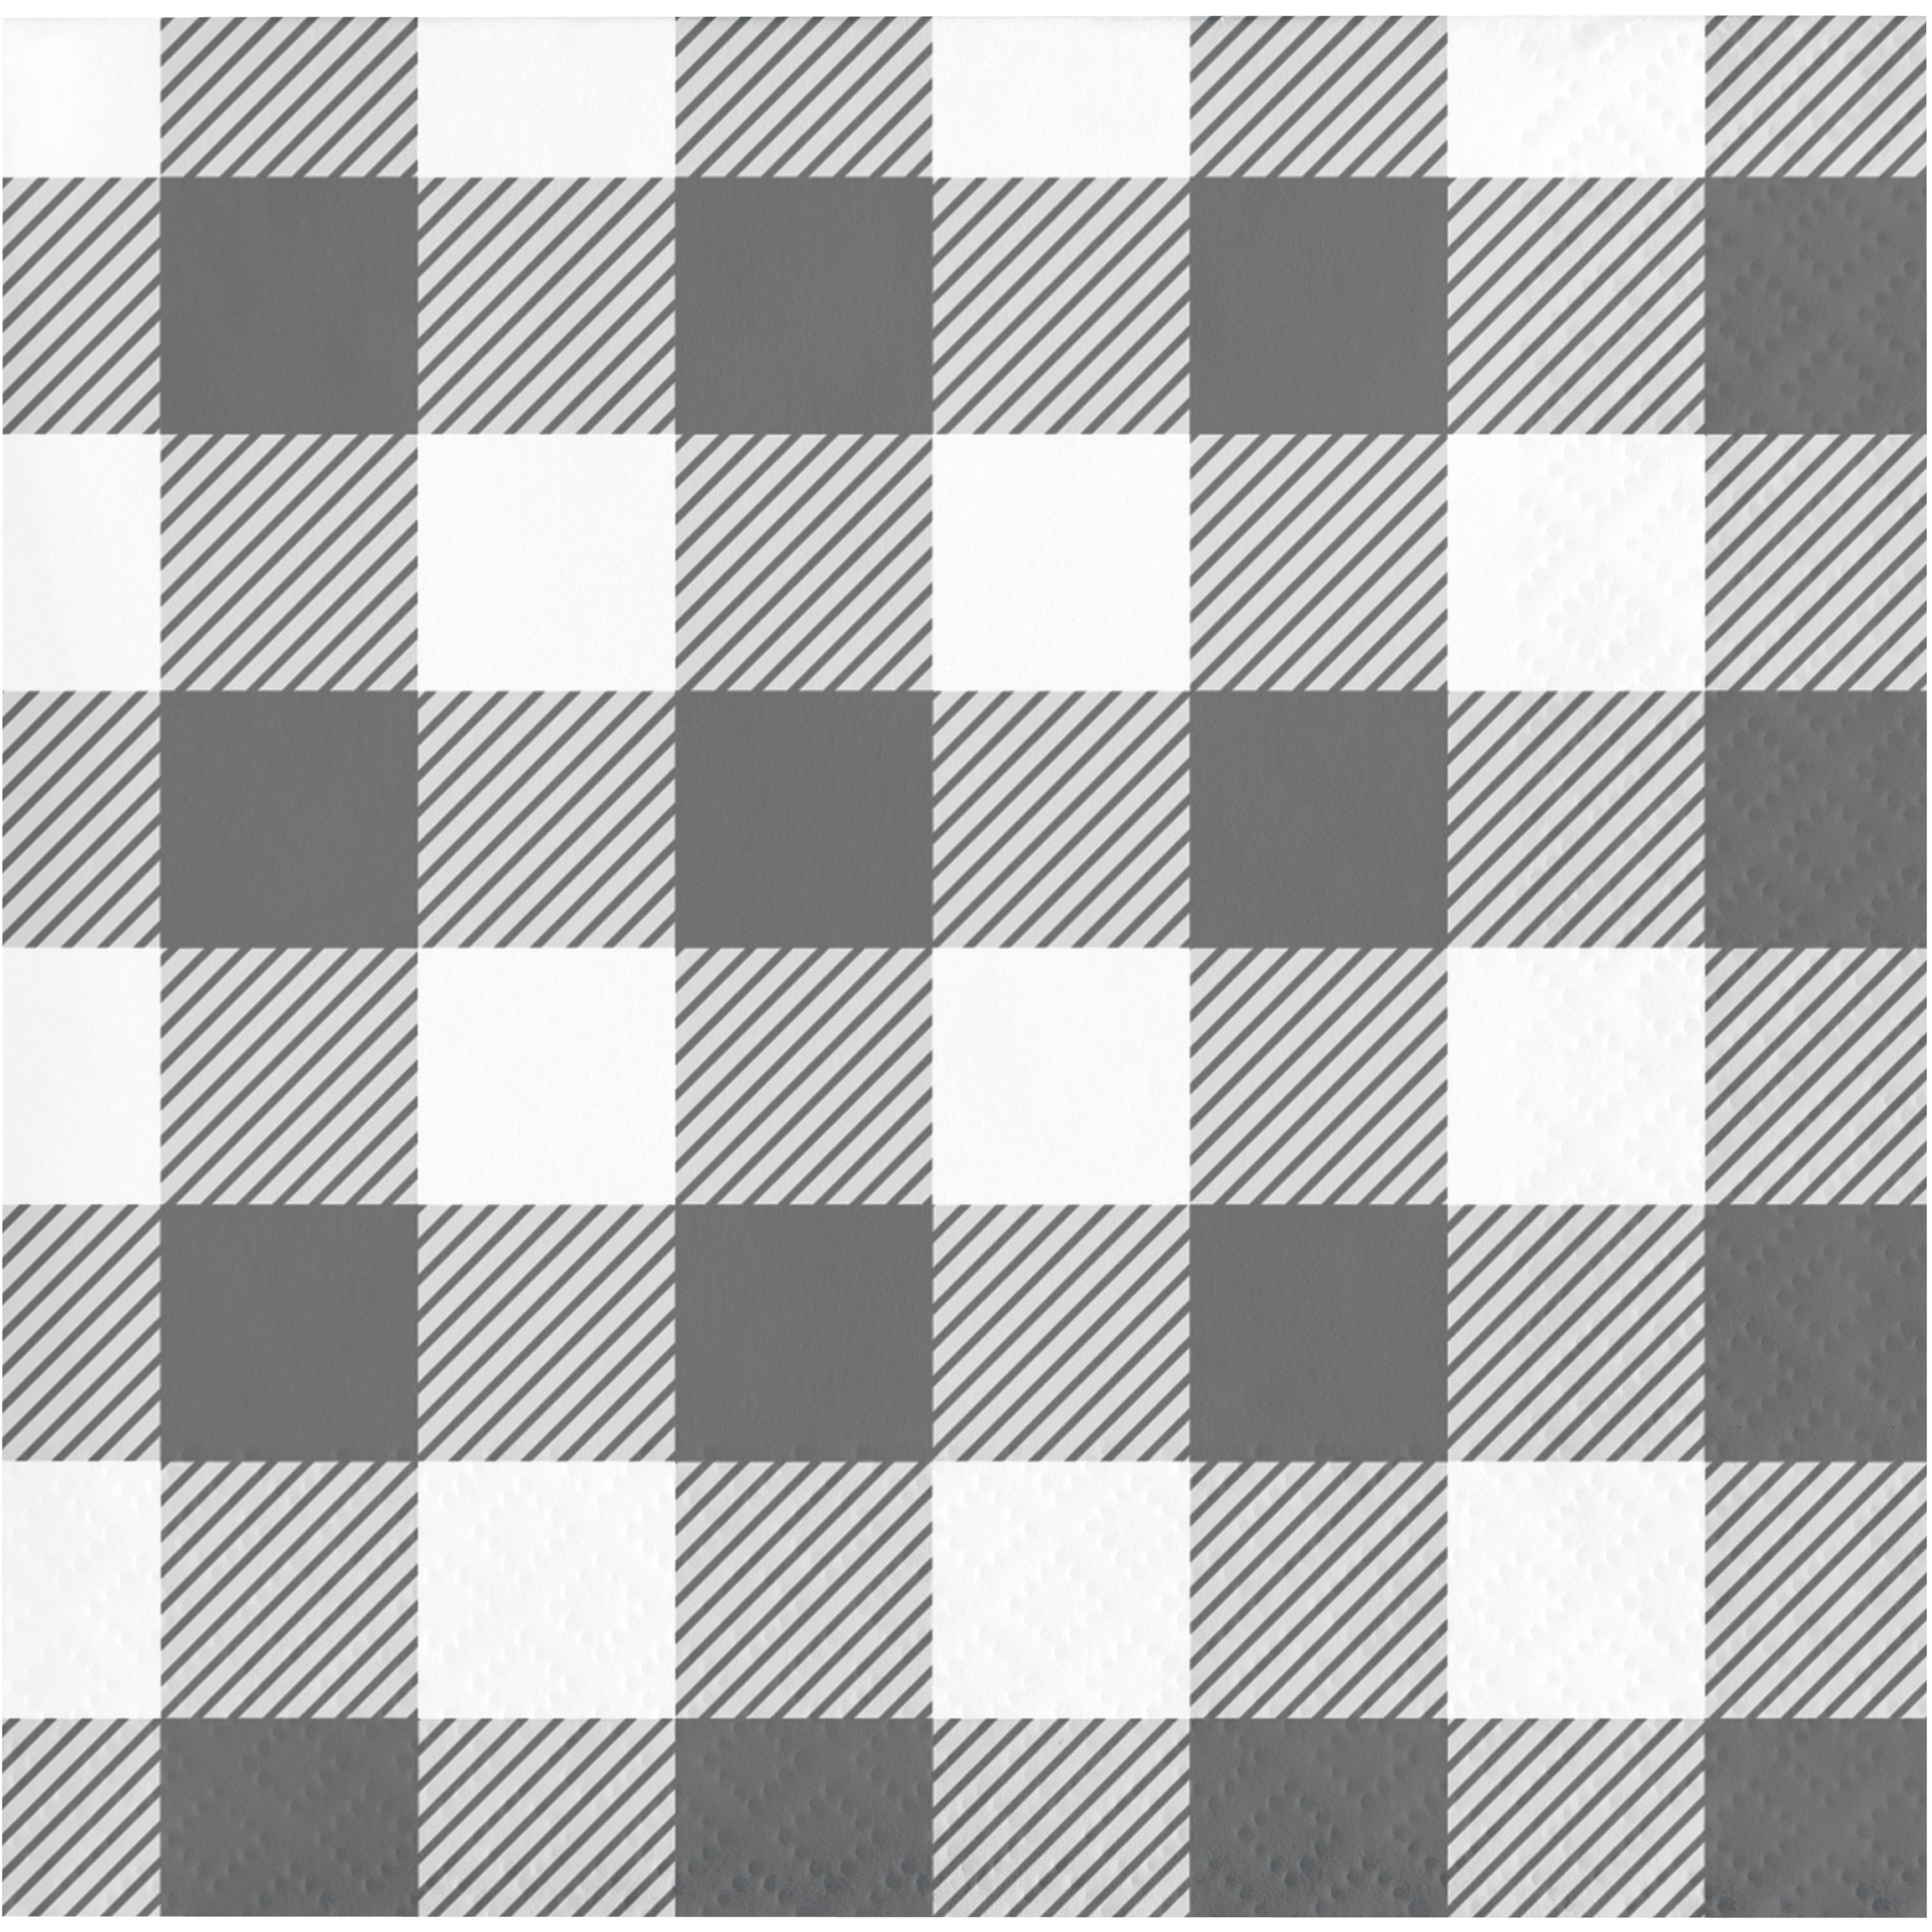 Creative Converting 50 Count Beverage Napkins Red Gingham